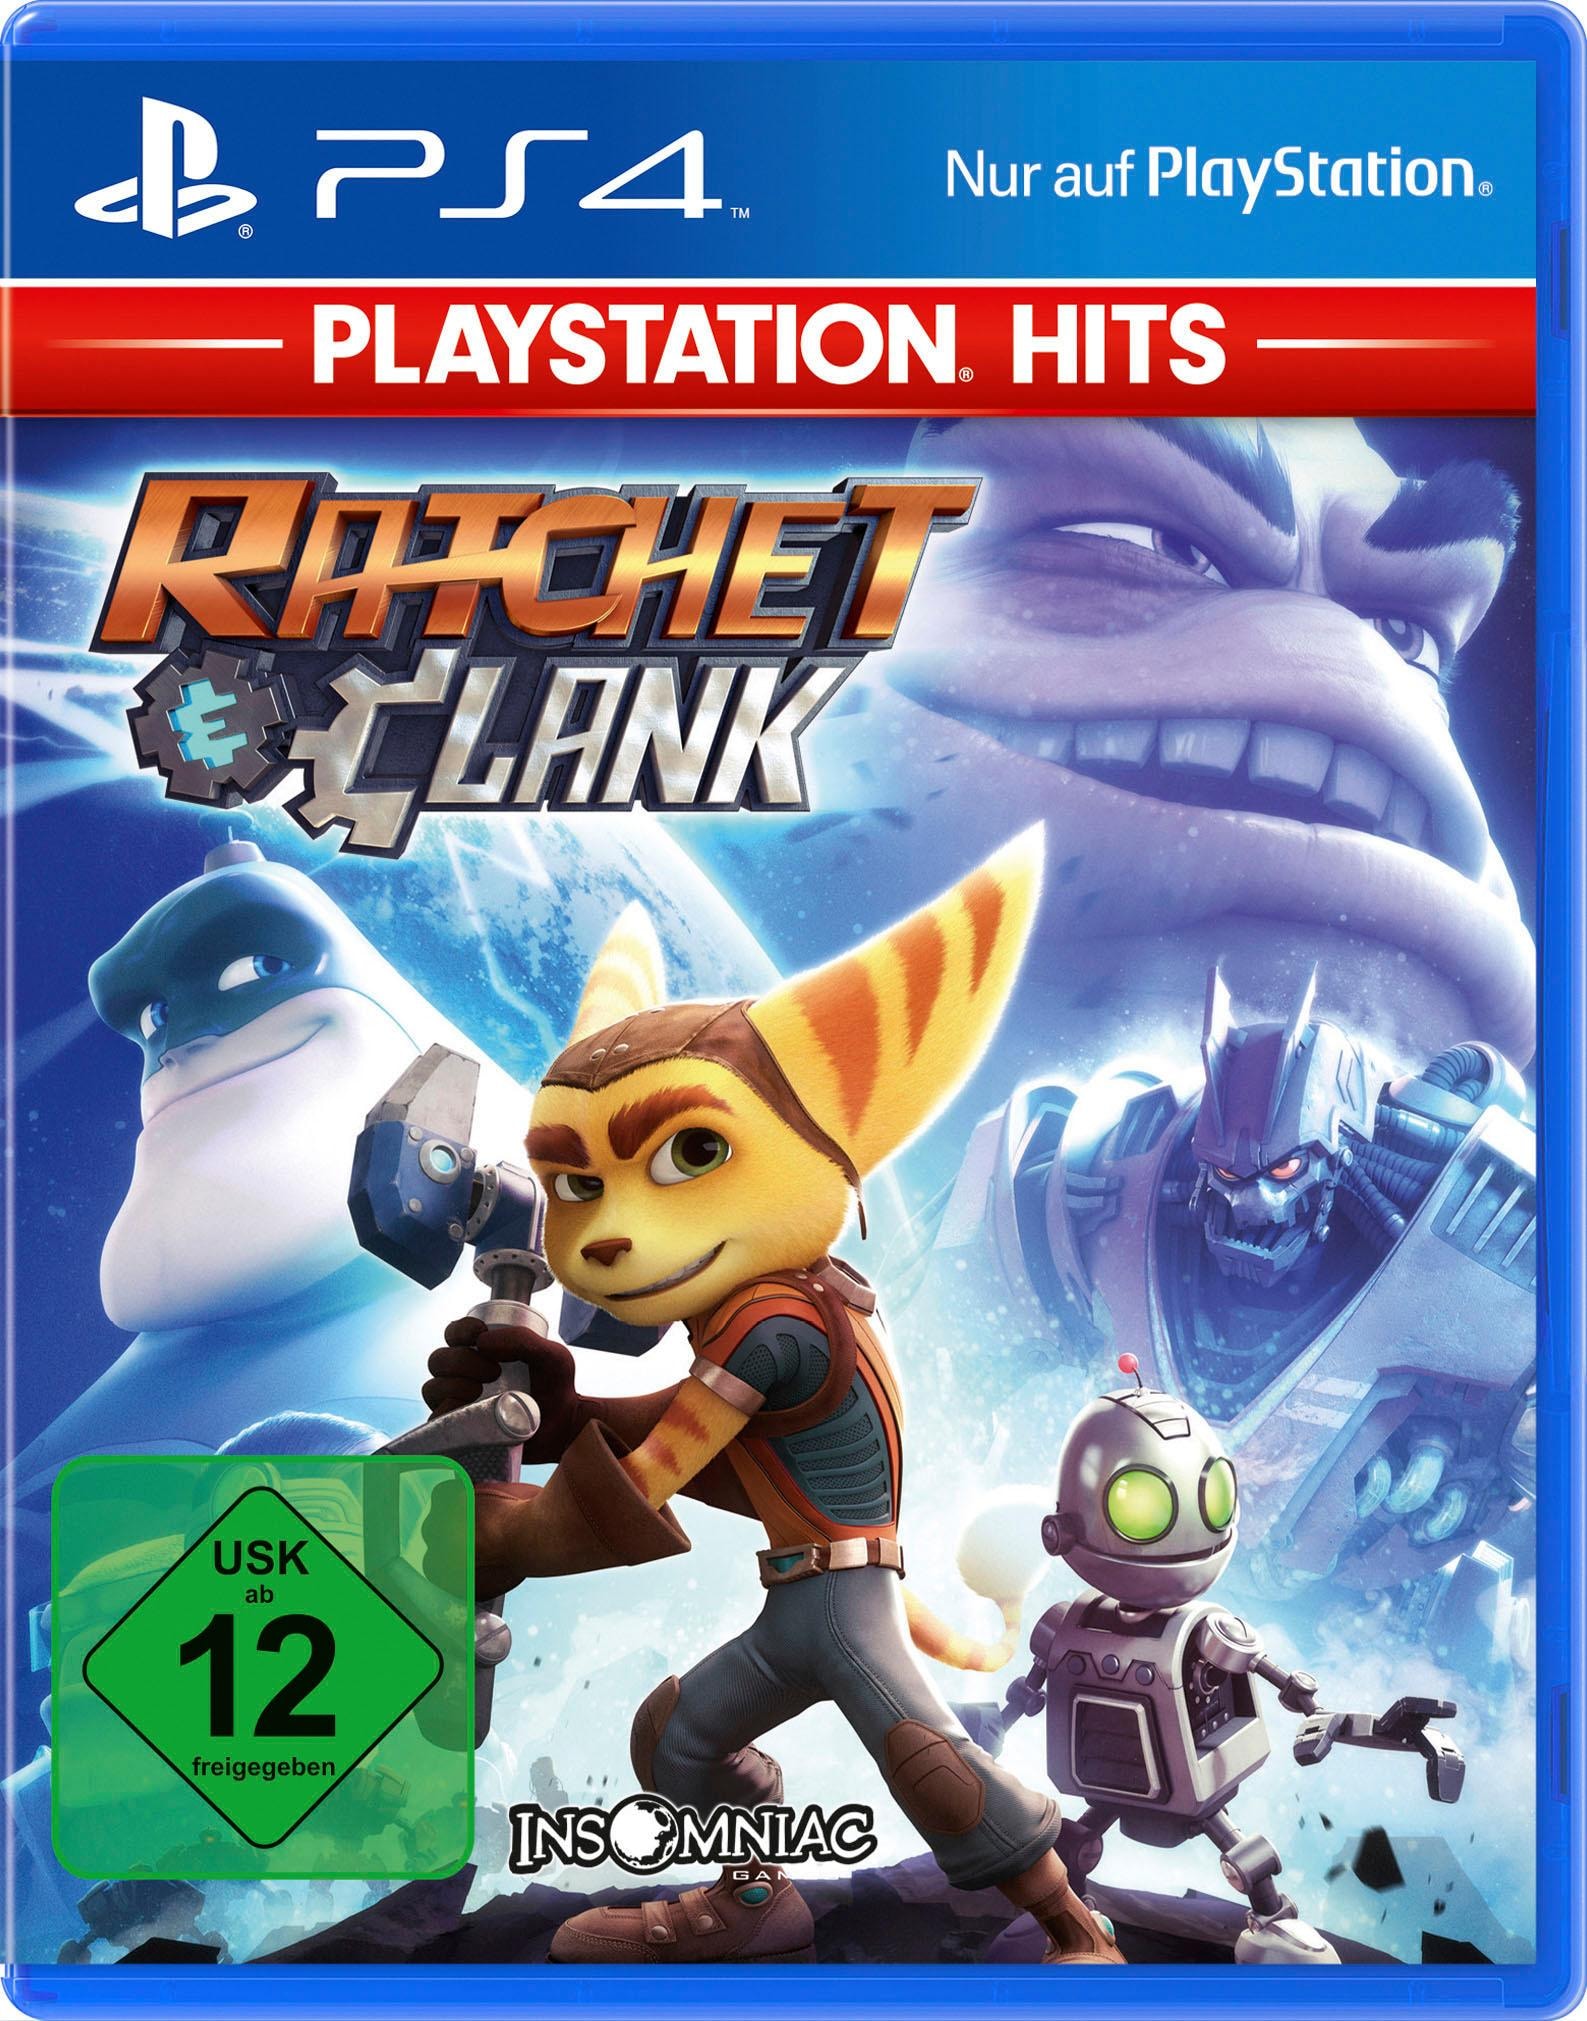 Spielesoftware »Ratchet & Clank«, PlayStation 4, Software Pyramide